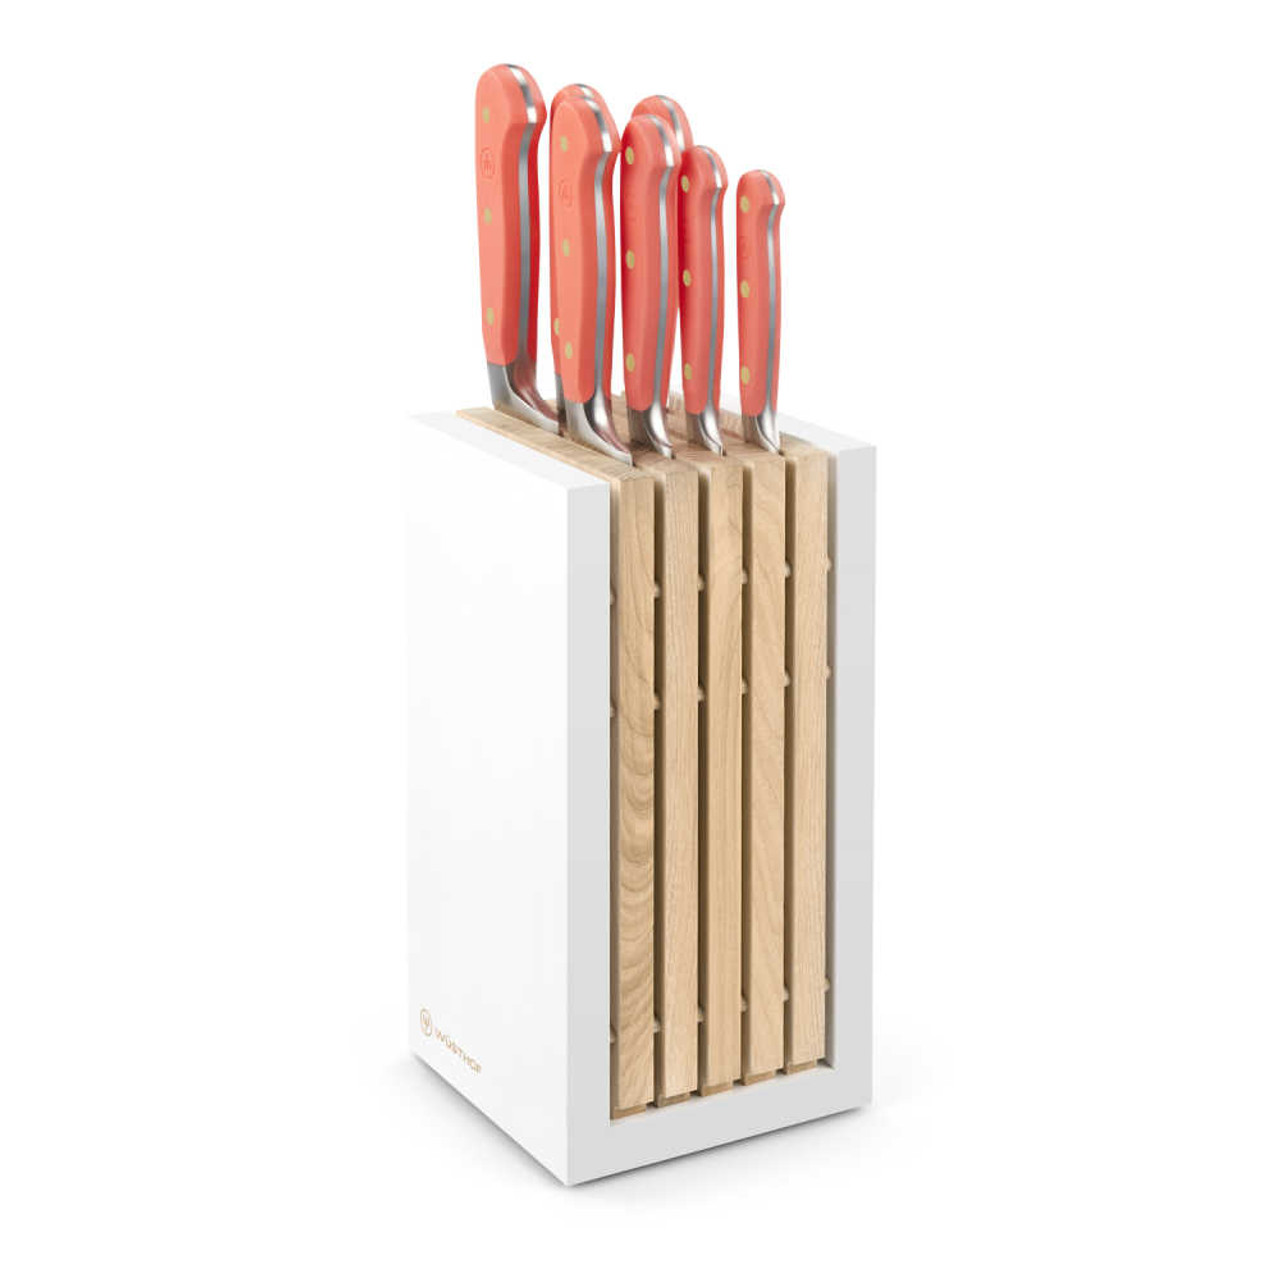 https://cdn11.bigcommerce.com/s-hccytny0od/images/stencil/1280x1280/products/5391/23389/Wusthof_Classic_Color_8-Piece_Knife_Block_Set_Coral_Peach__74938.1682004673.jpg?c=2?imbypass=on